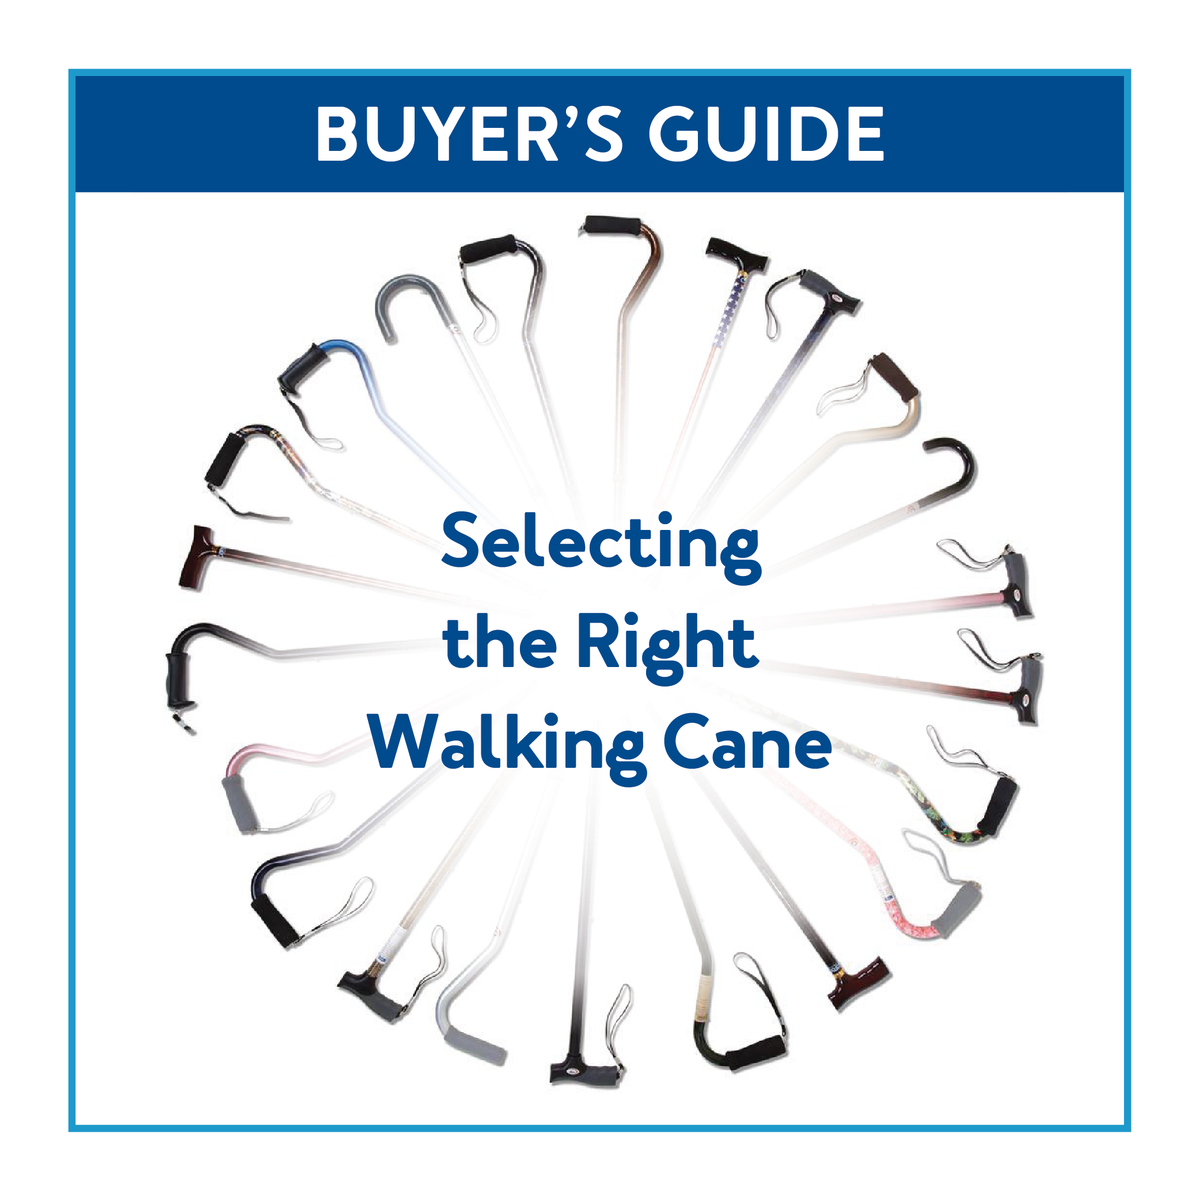 Walking canes encircled by a blue border with text: Buyer's Guide: Choosing the Right Cane.